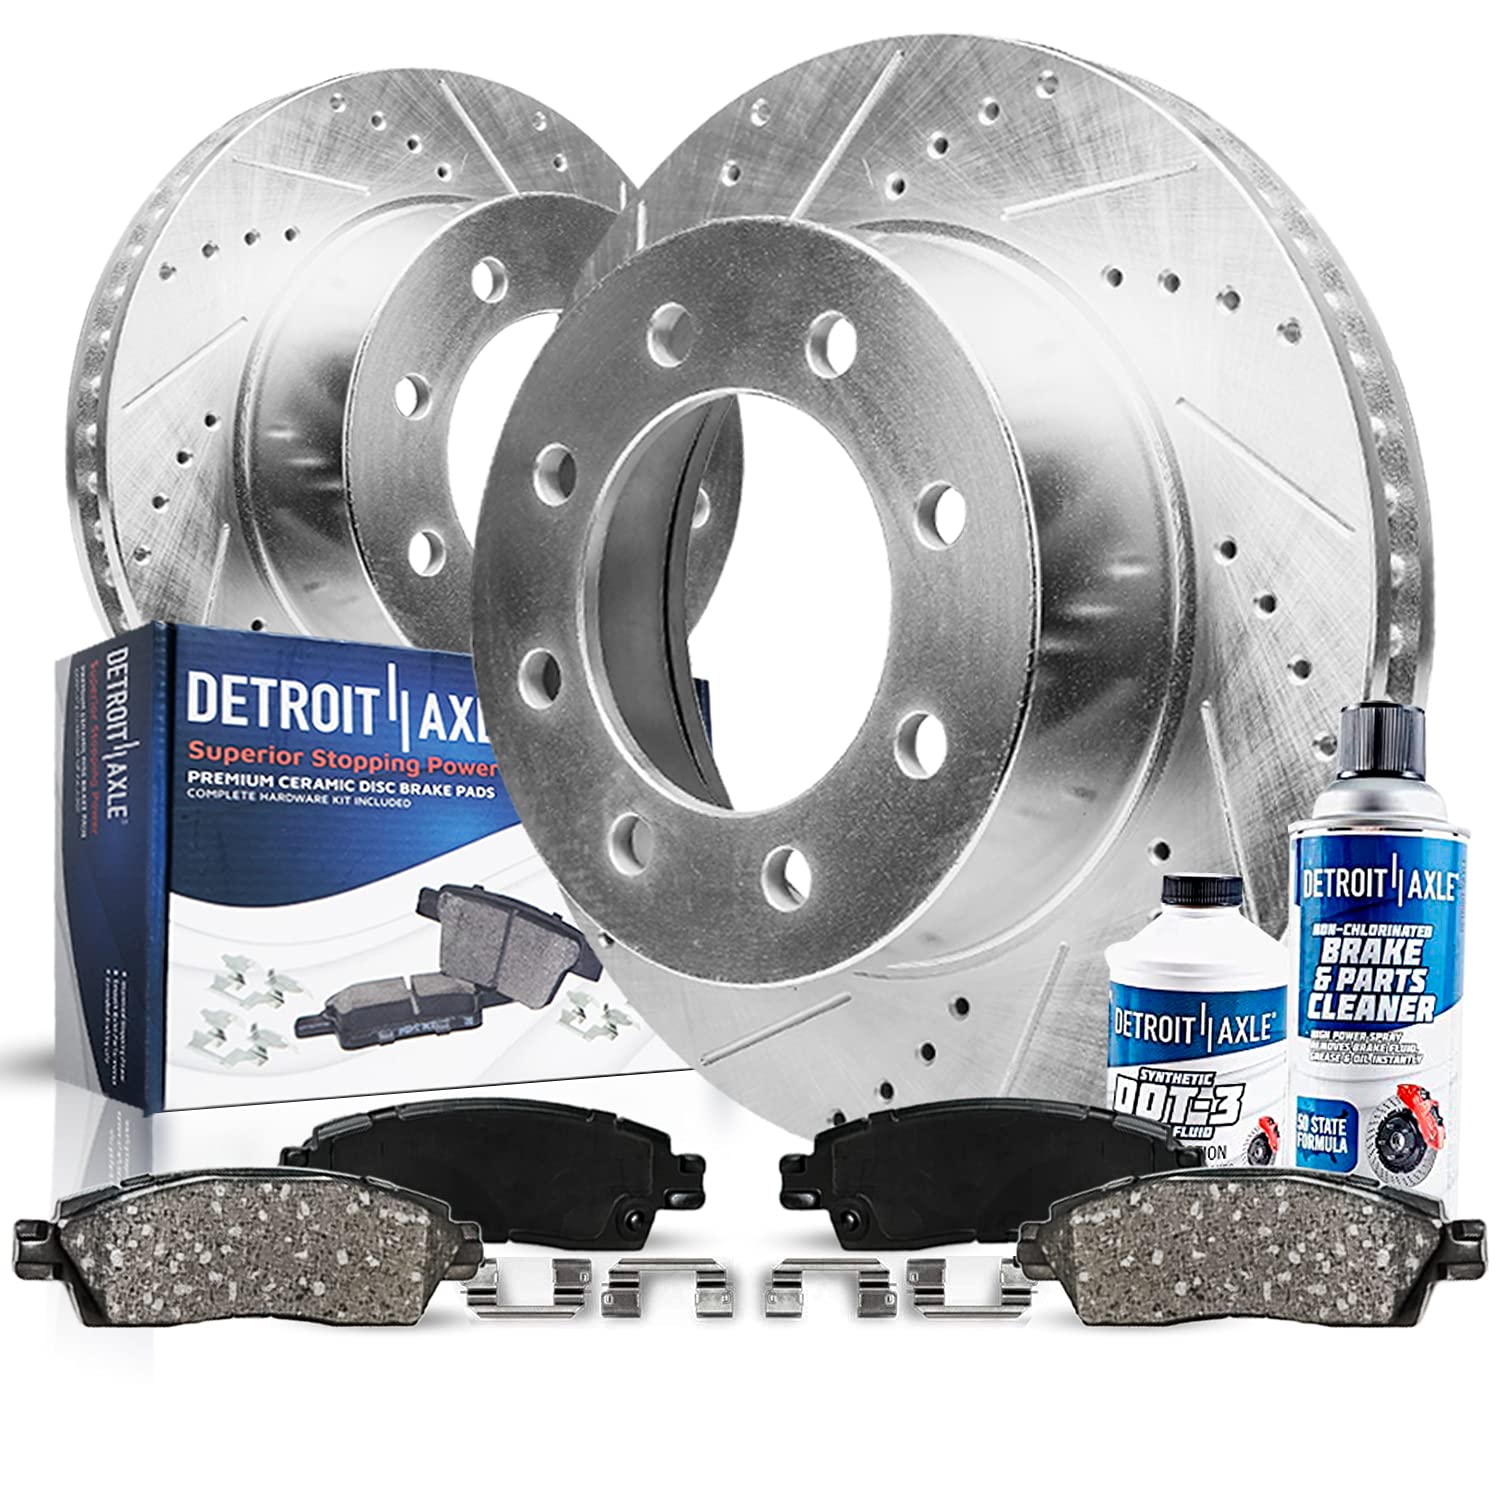 Detroit Axle - Front Brake Kit for 05-12 Ford F-250 F-350 Super Duty, 10-12 F-450 Super Duty Replacement 2005 2006 2007 2008 2009 2010 2011 2012 Drilled Slotted Brakes Rotors Ceramic Brake Pads